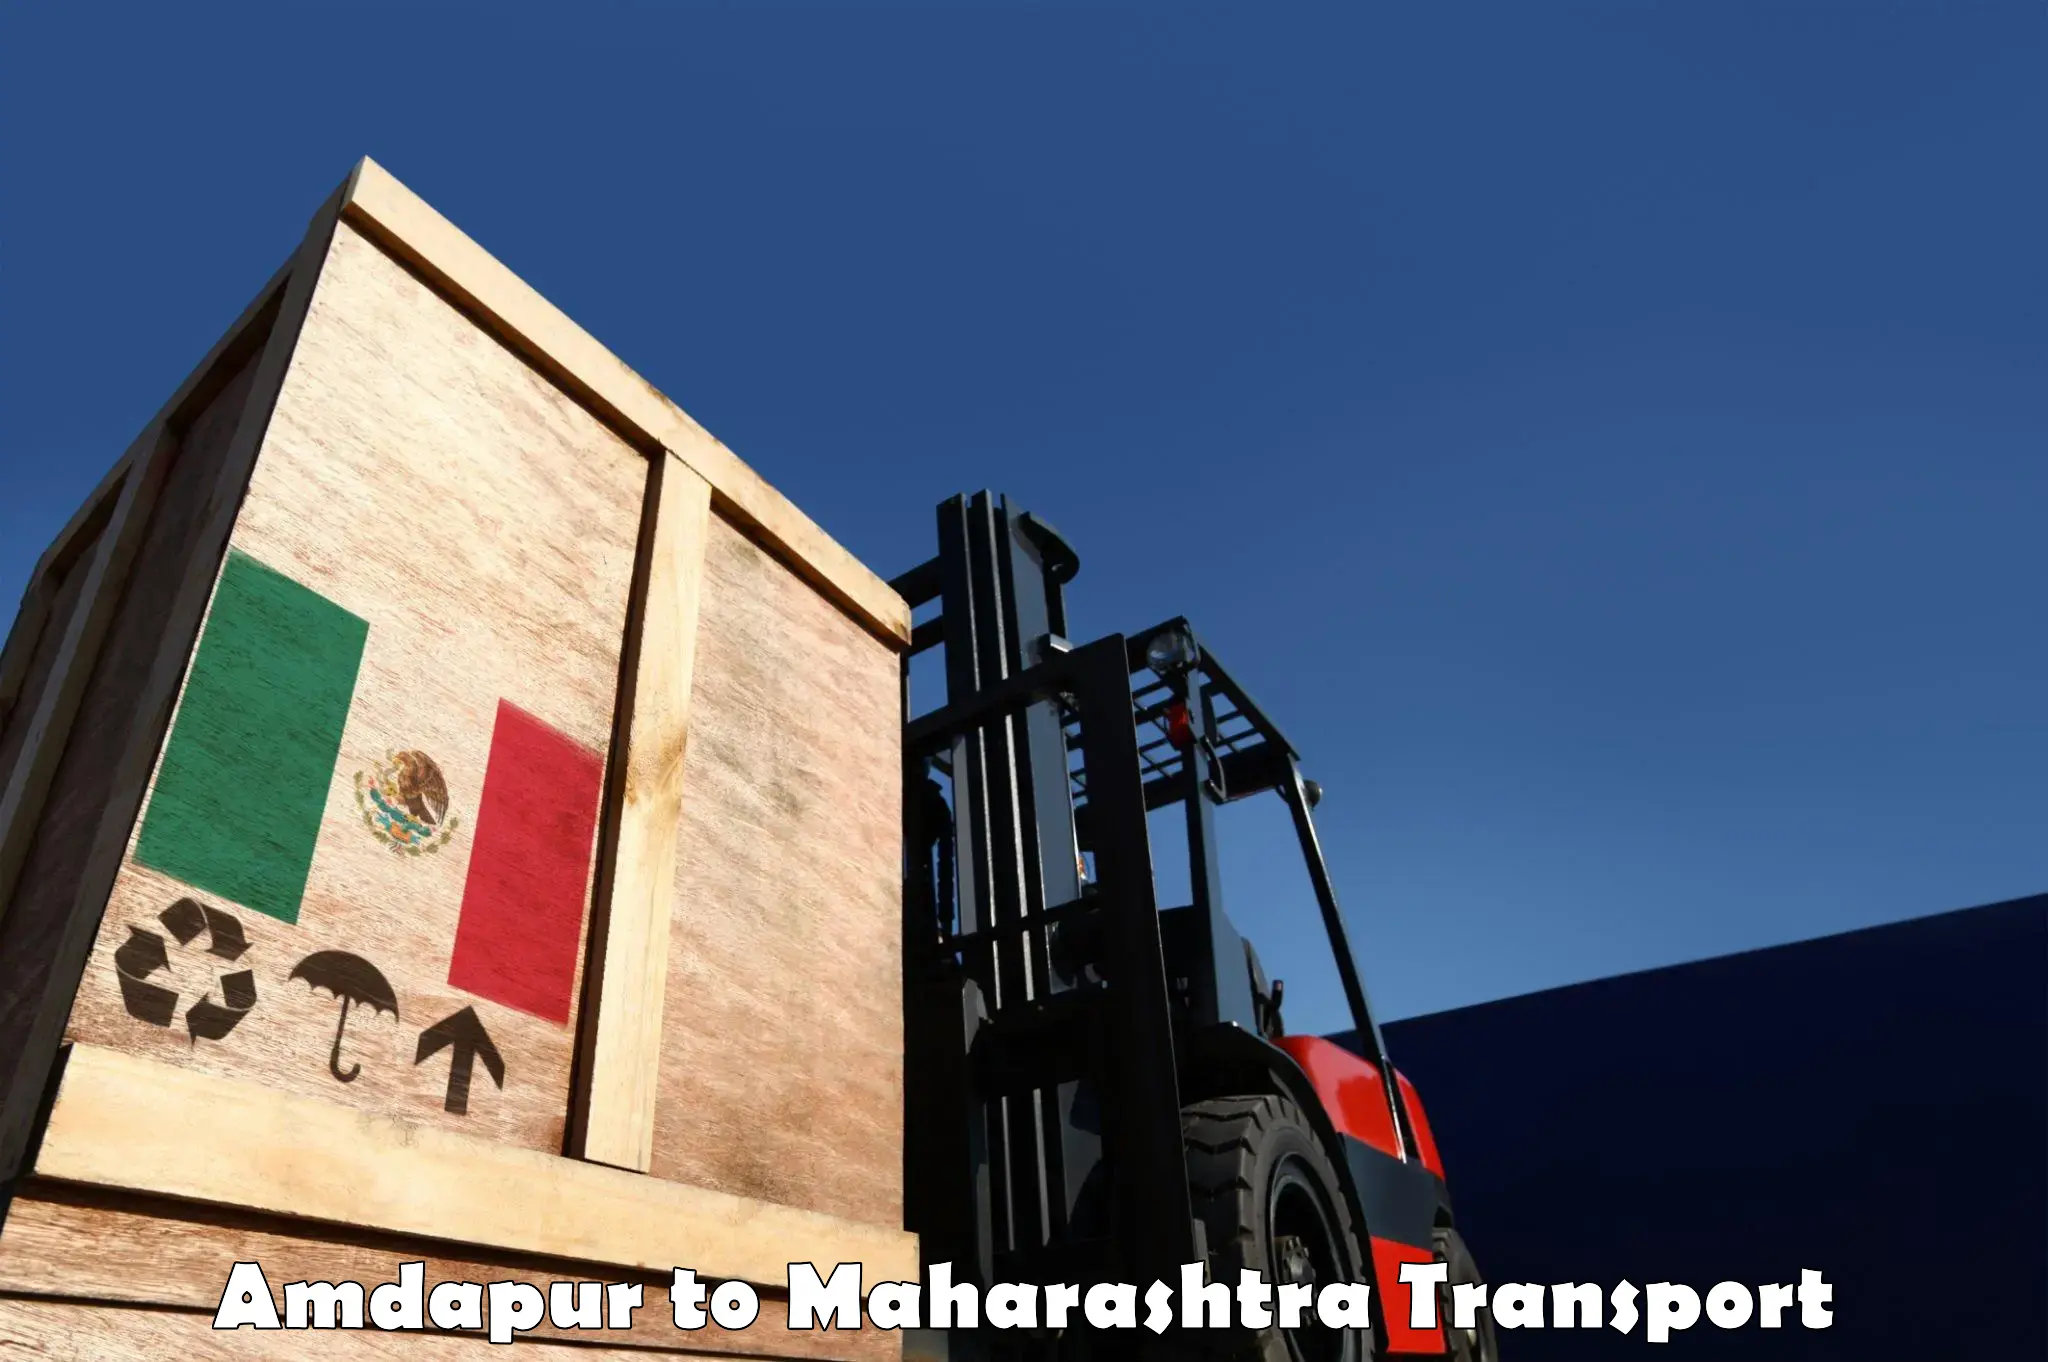 Container transport service in Amdapur to Sindhudurg